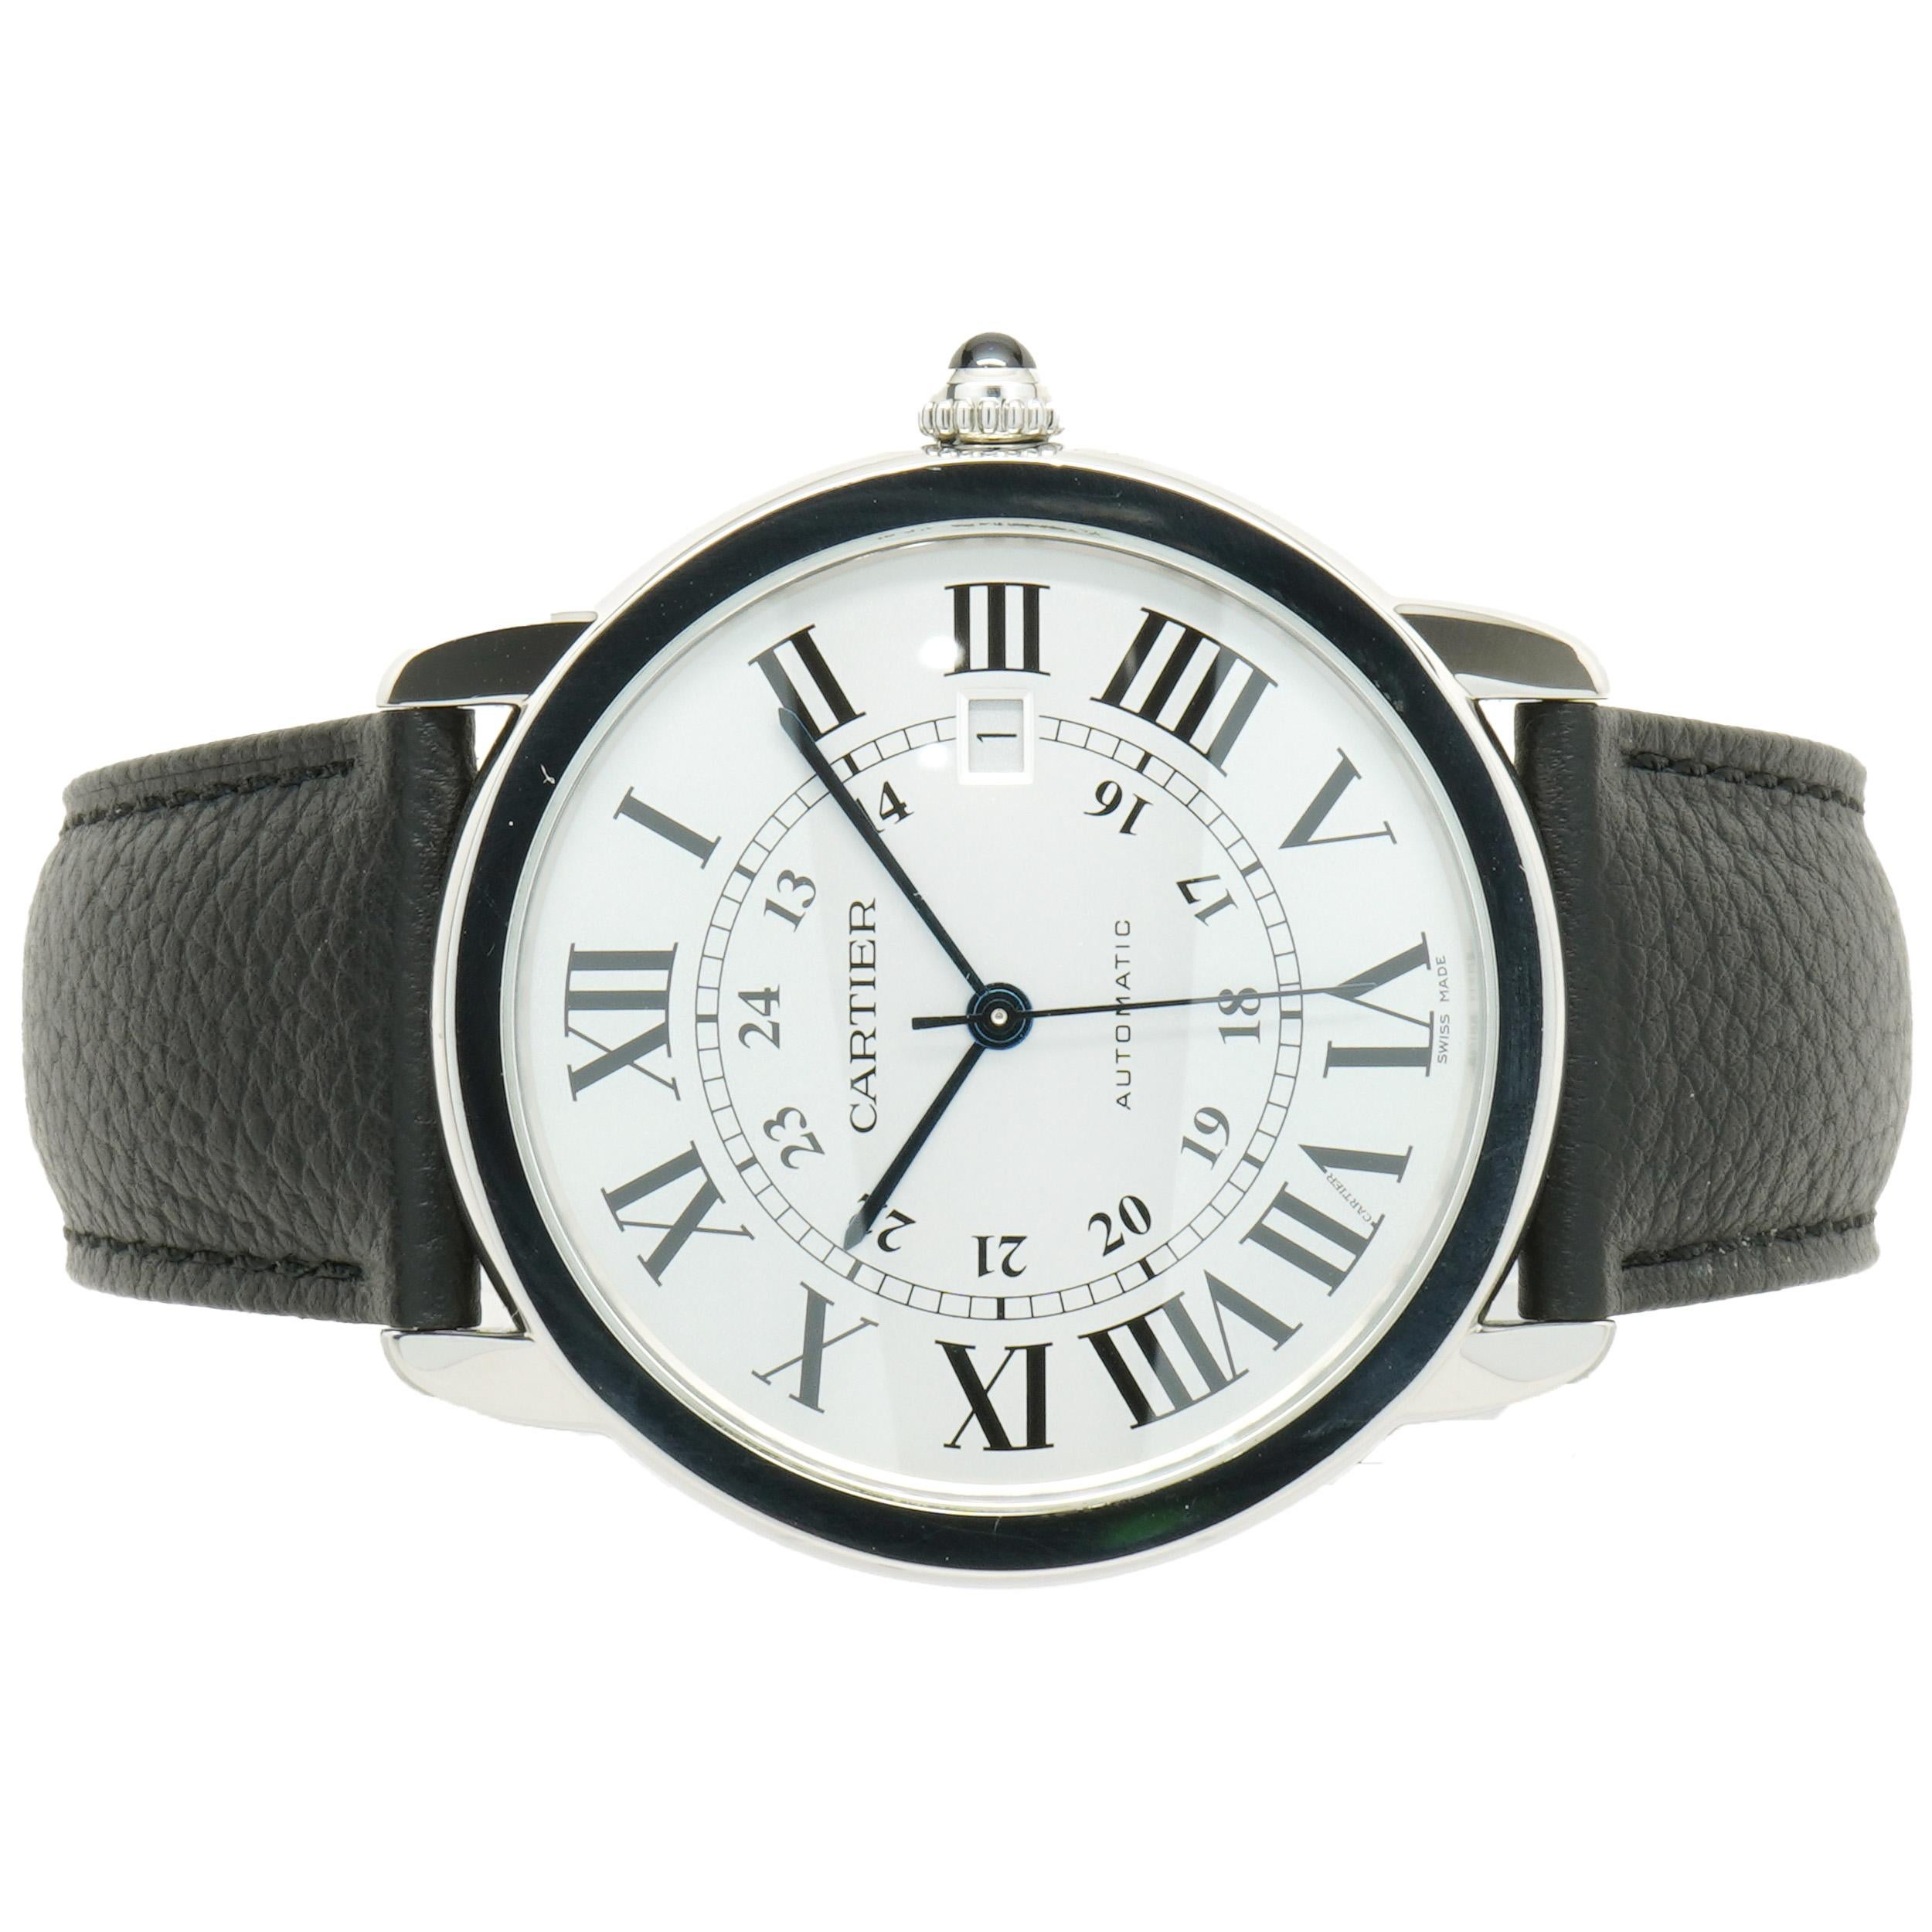 Movement: automatic
Function: hours, minutes, seconds, date
Case: 42mm stainless steel round case 
Dial: white roman dial
Band: Cartier black leather strap, deployment clasp
Serial #: 27285XXX
Reference # 3802

No box or papers included
